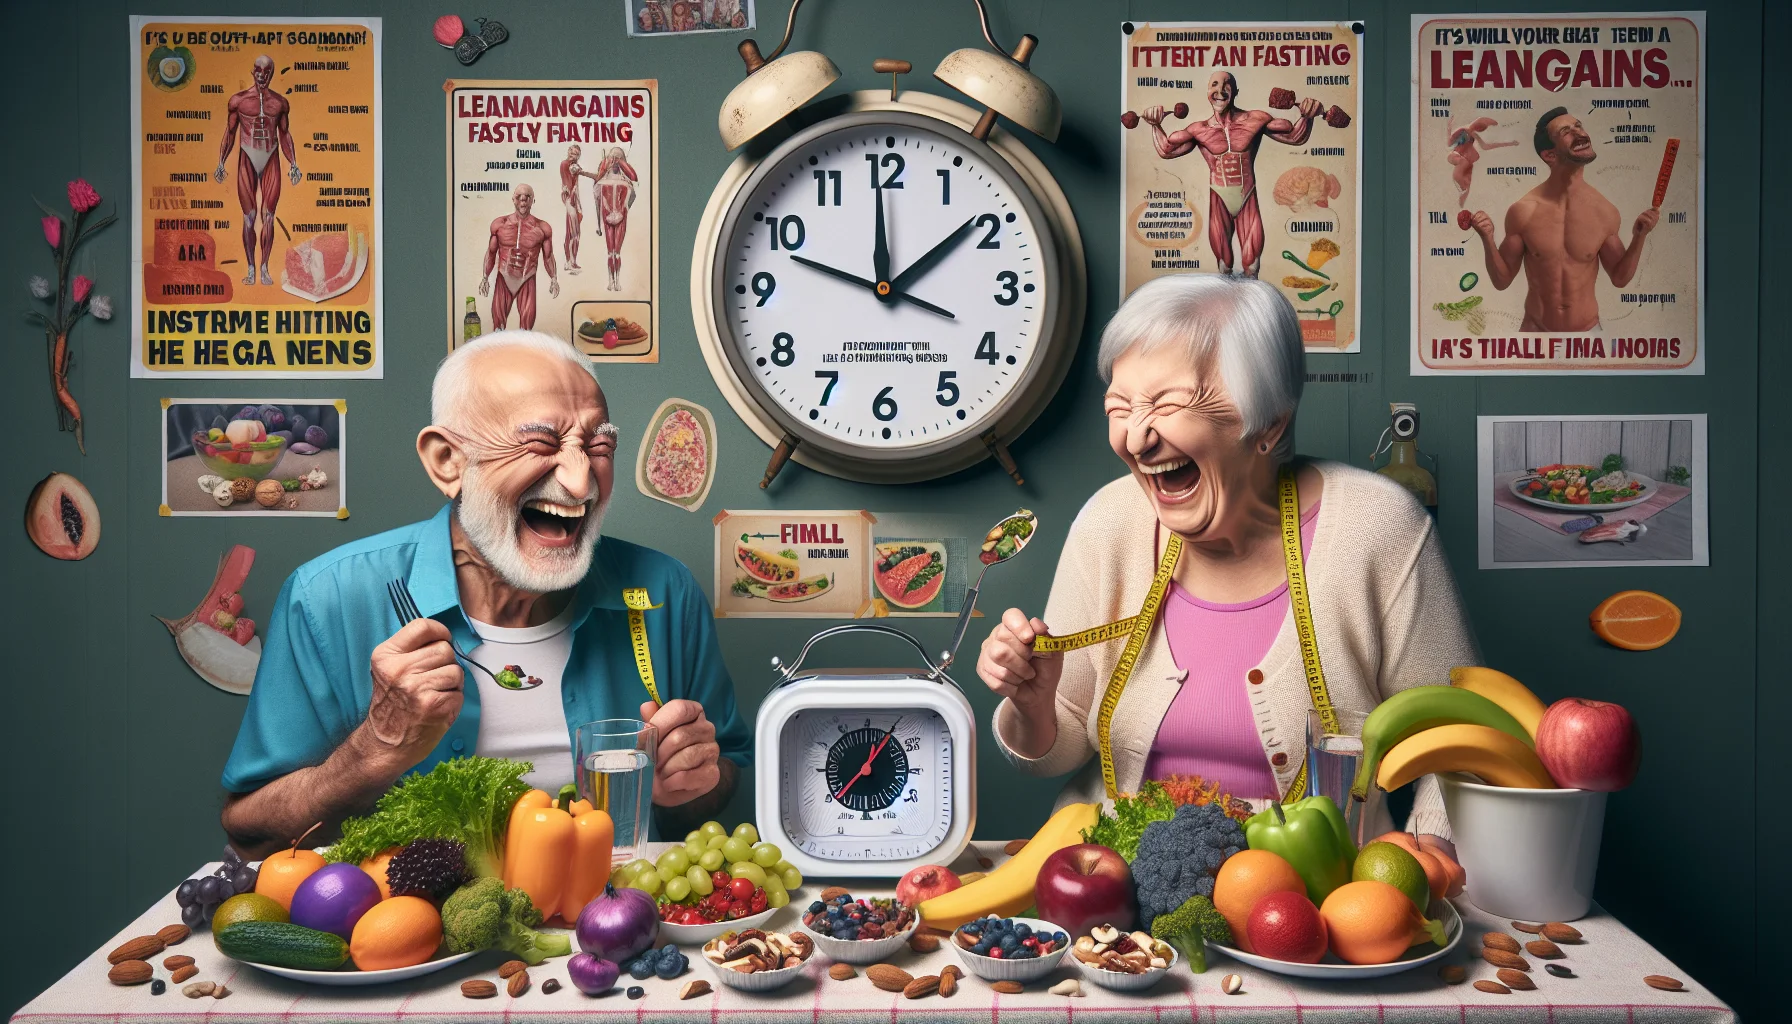 Craft a humorous and realistic image depicting the concept of intermittent fasting using the leangains method. In the scenario, an elderly Caucasian man and an elderly South Asian woman are laughing heartily while looking at a large clock that shows it's finally time to eat. They have set the dining table filled with a spread of colorful fruits, vegetables, lean proteins, and nuts - symbolic of a healthy diet. The background is decorated with health-centric posters and ludicrous gadgets meant for measuring food earning chuckles from them. The tone is light-hearted and funny relating to old age, diets, and healthy eating.